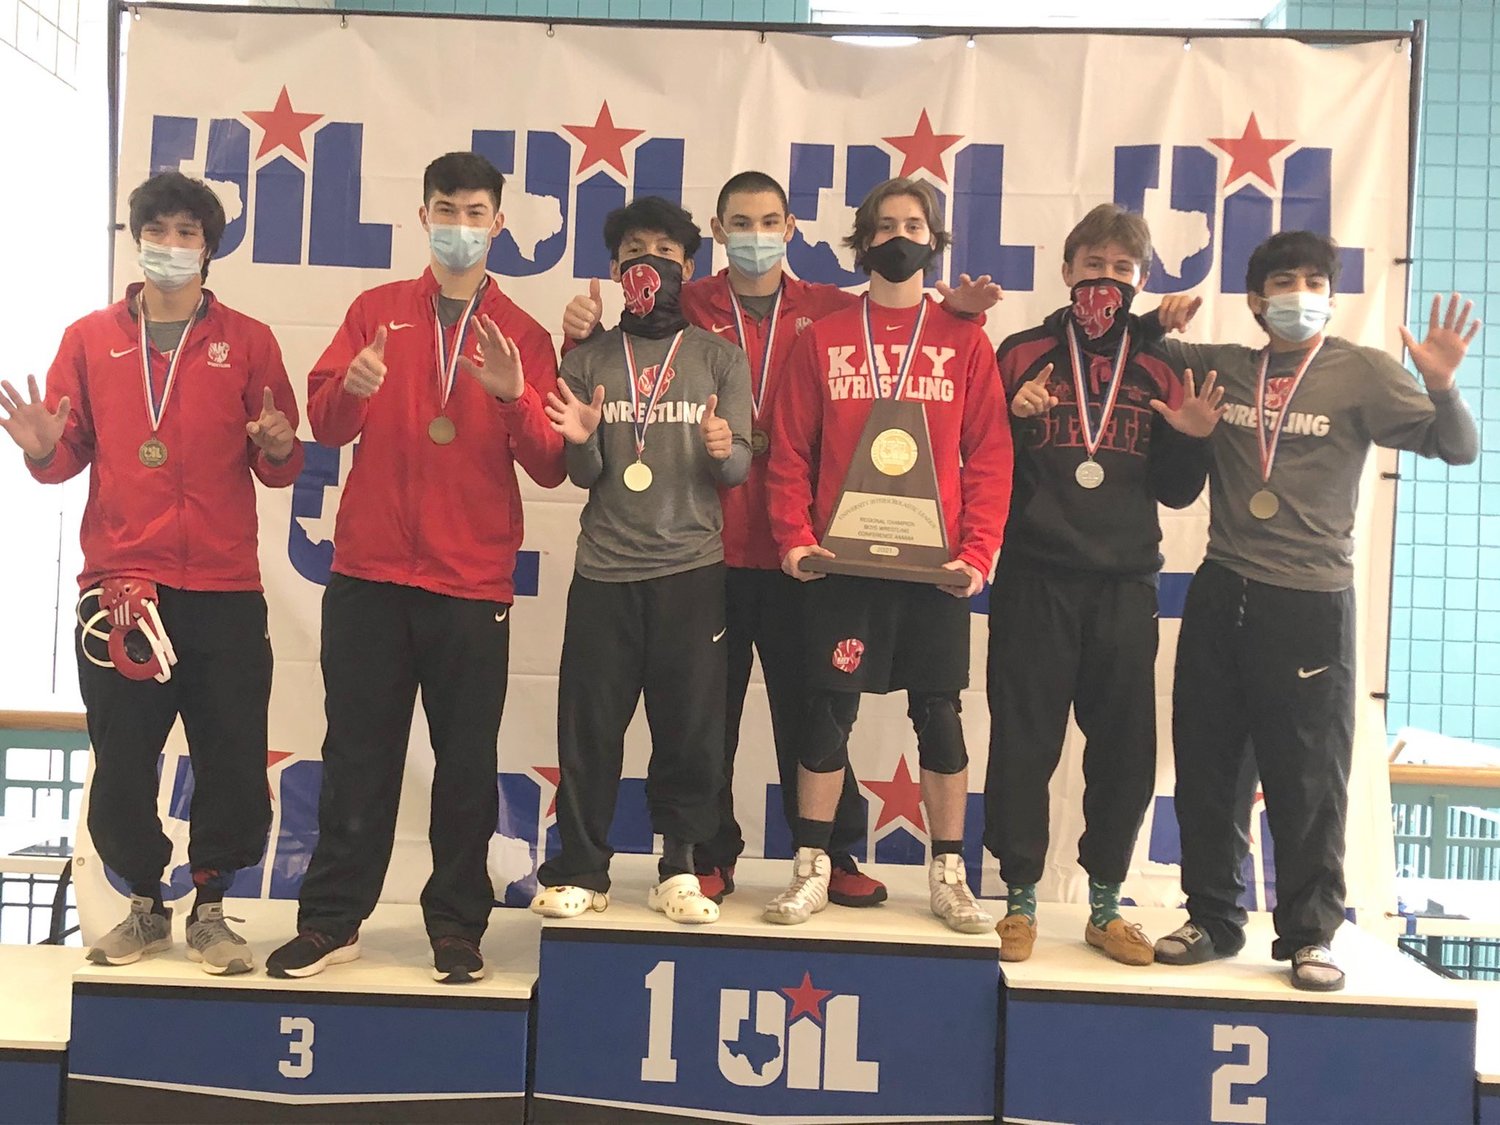 The Katy High boys won their sixth consecutive team regional wrestling title by scoring 145 points at the Class 6A Region III wrestling meet Saturday, April 17, at the Merrell Center. All seven Tiger boys wrestlers qualified for state.